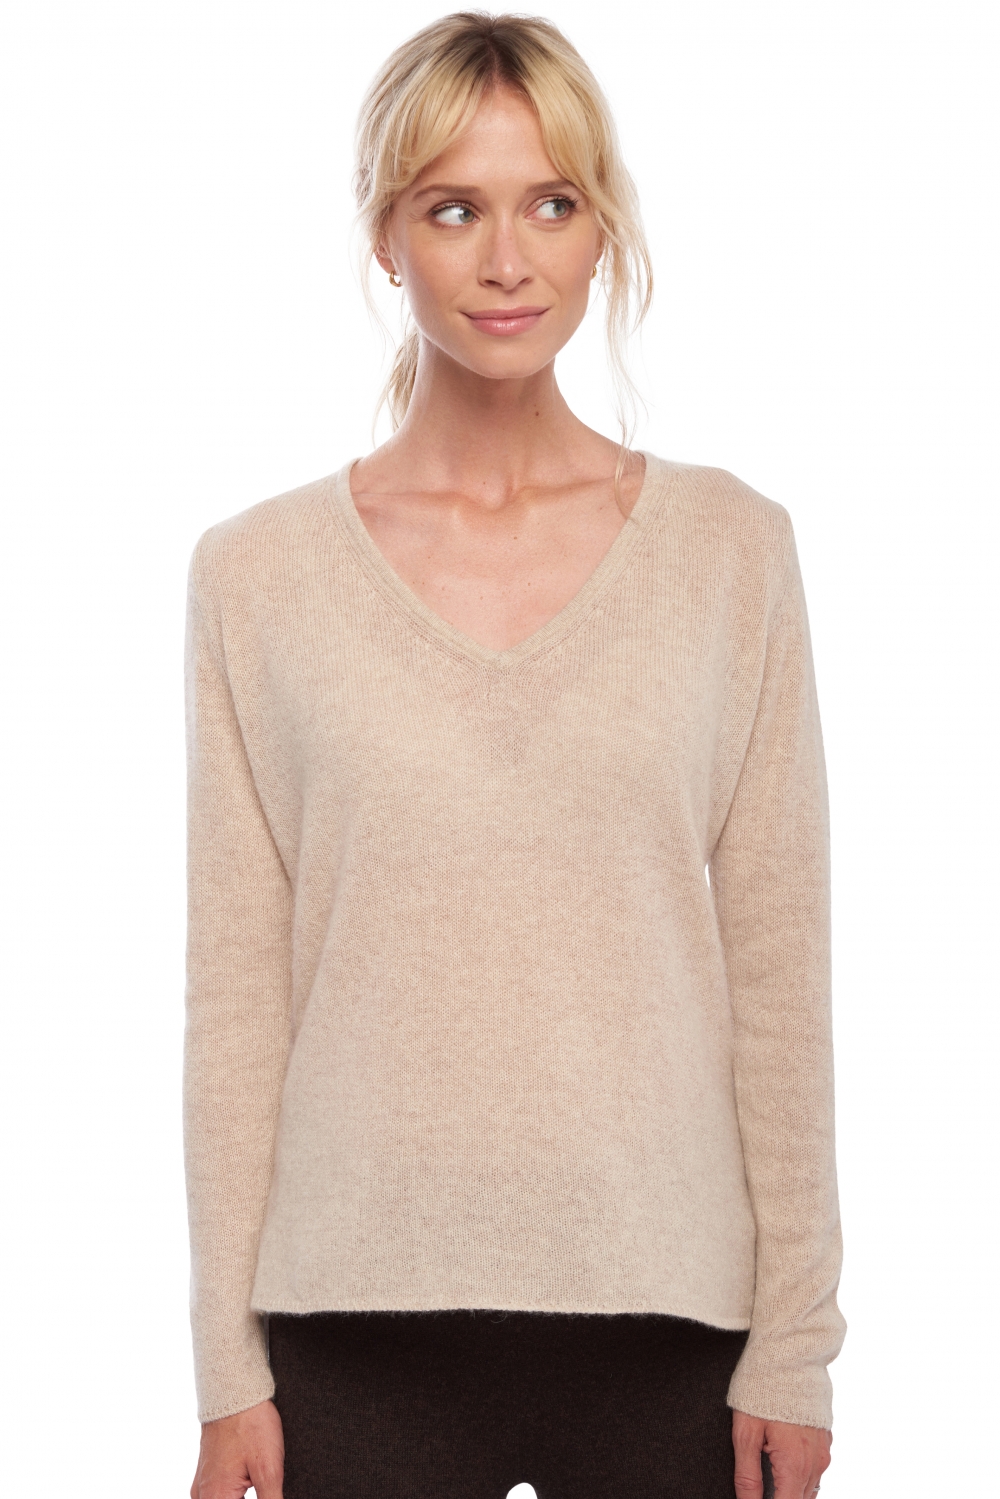 Cashmere ladies basic sweaters at low prices flavie natural beige m